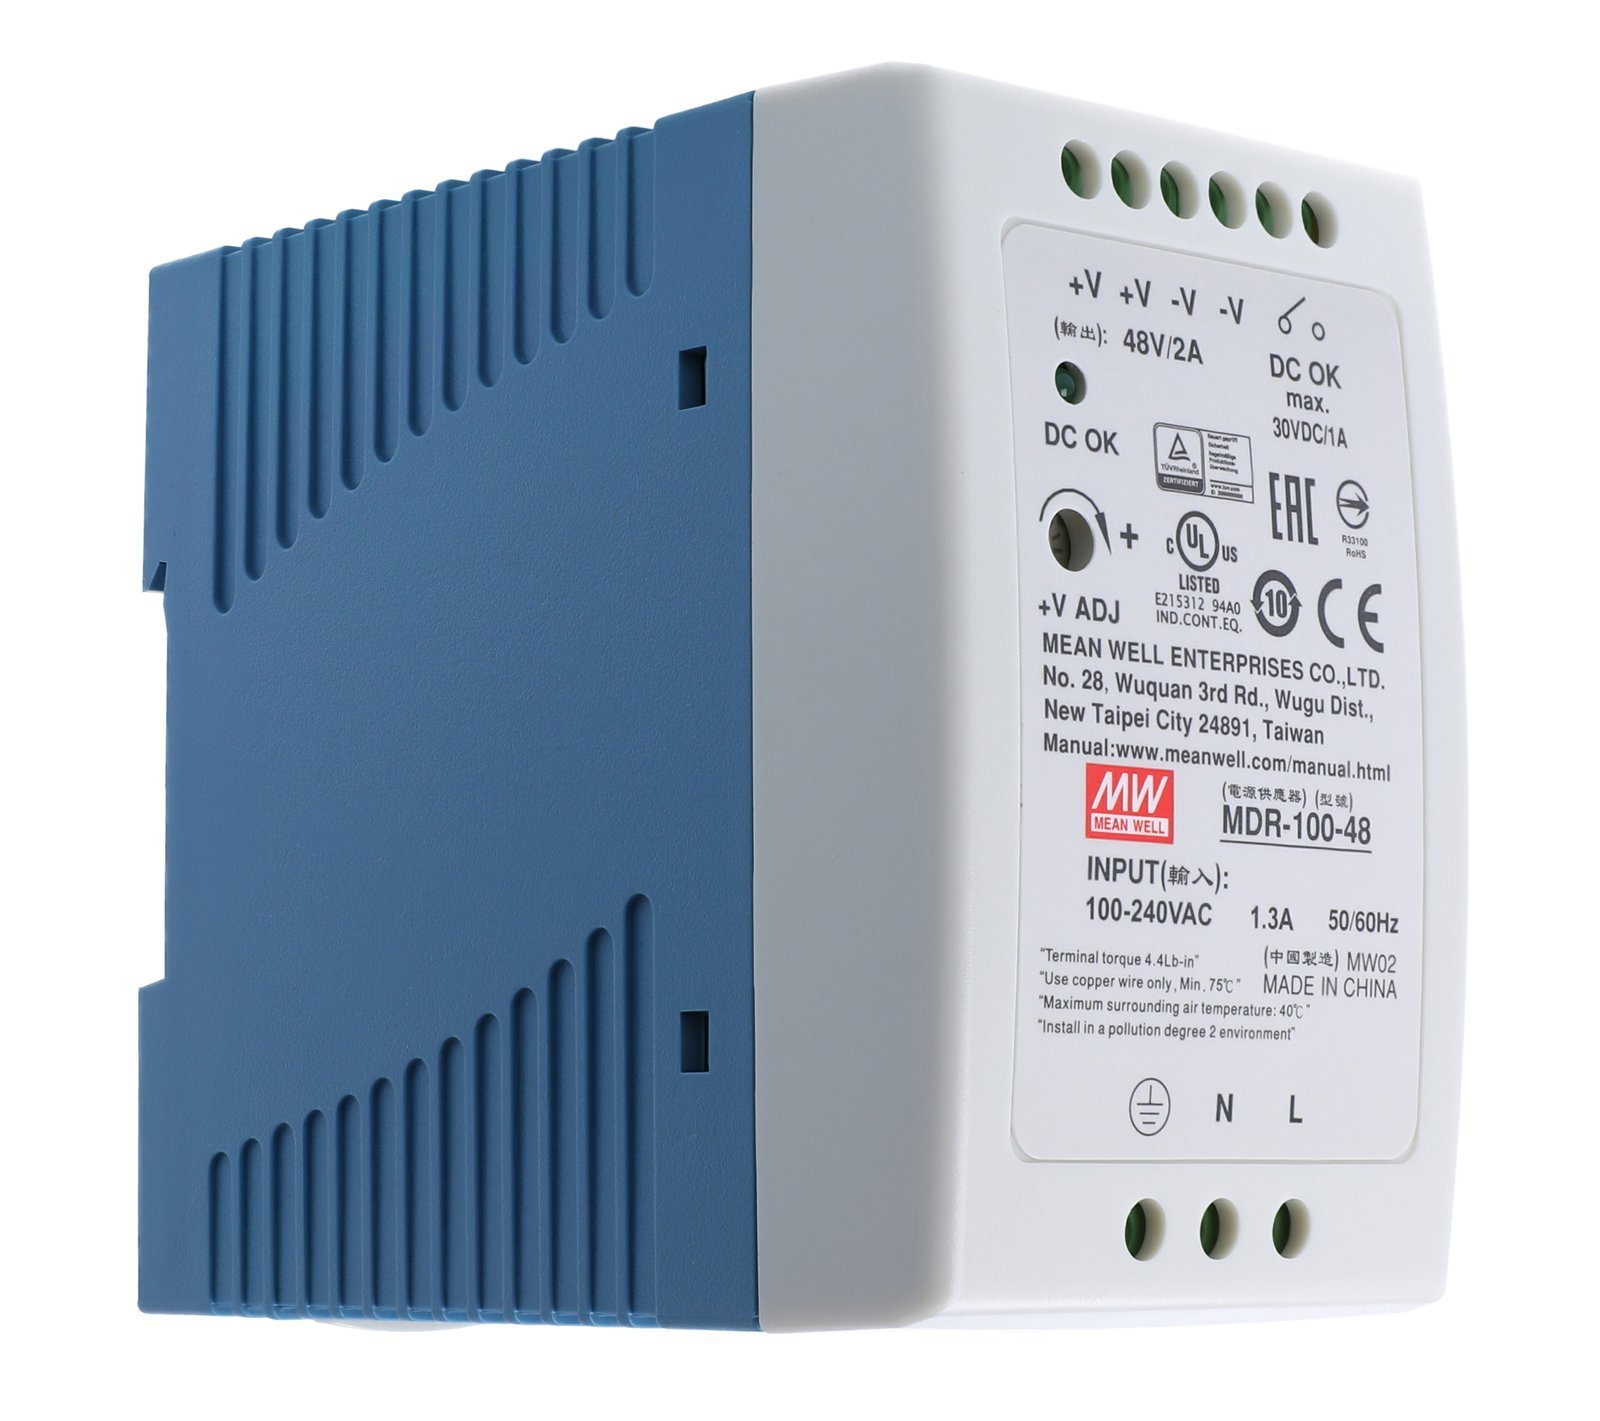 Power supply for a DIN rail 48V 2A 96W MEAN WELL, MDR-100-48 2A, DIN rail  power supplies \ MDR